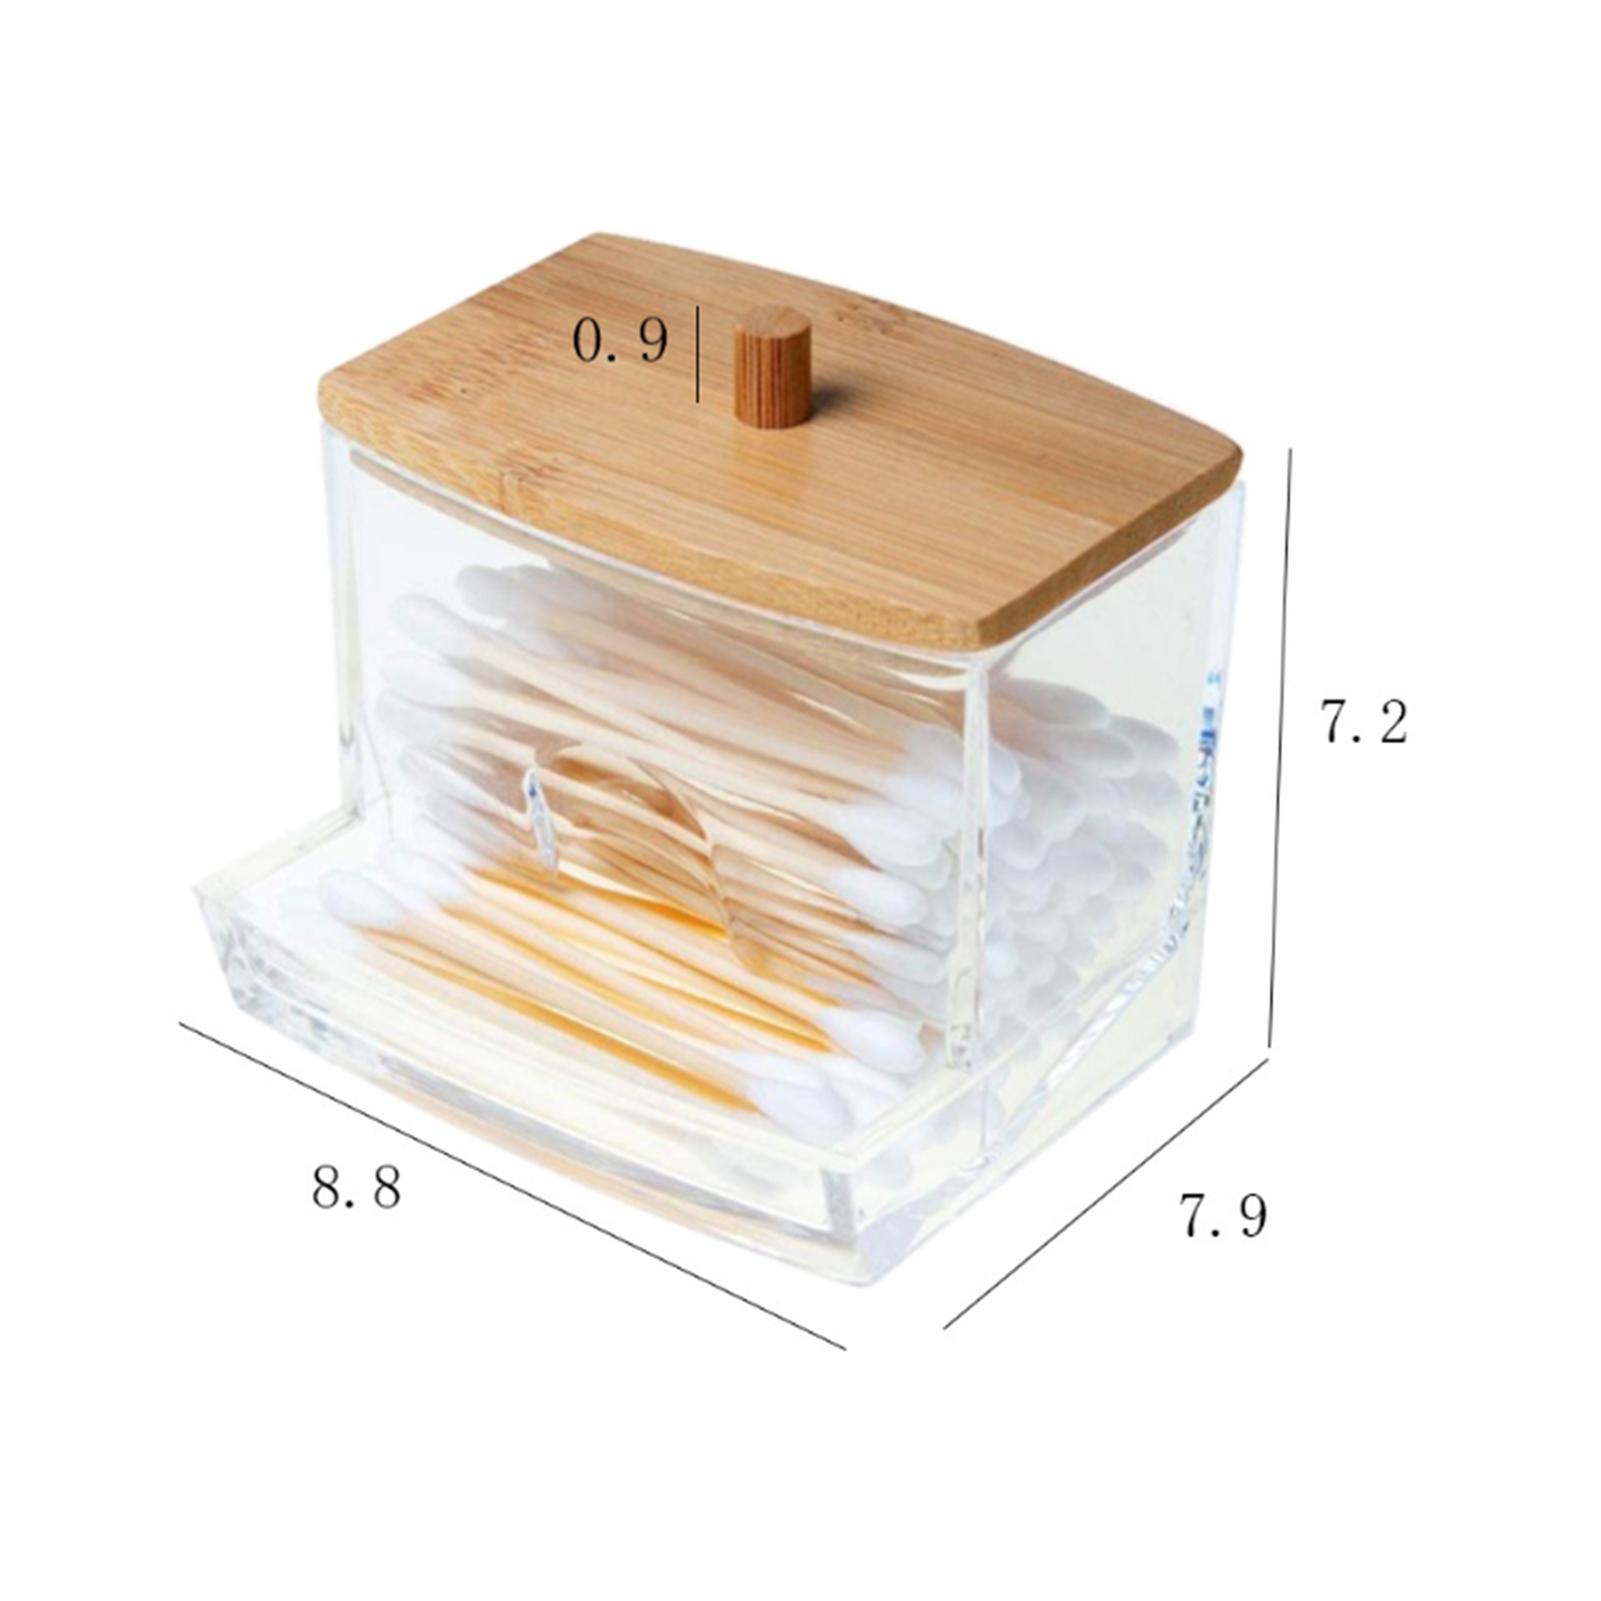 Upgrated Acrylic Cotton Swabs Storage Holder Bathroom Containers Apothecary Jar Qtip Holder for Storage Bamboo Lids